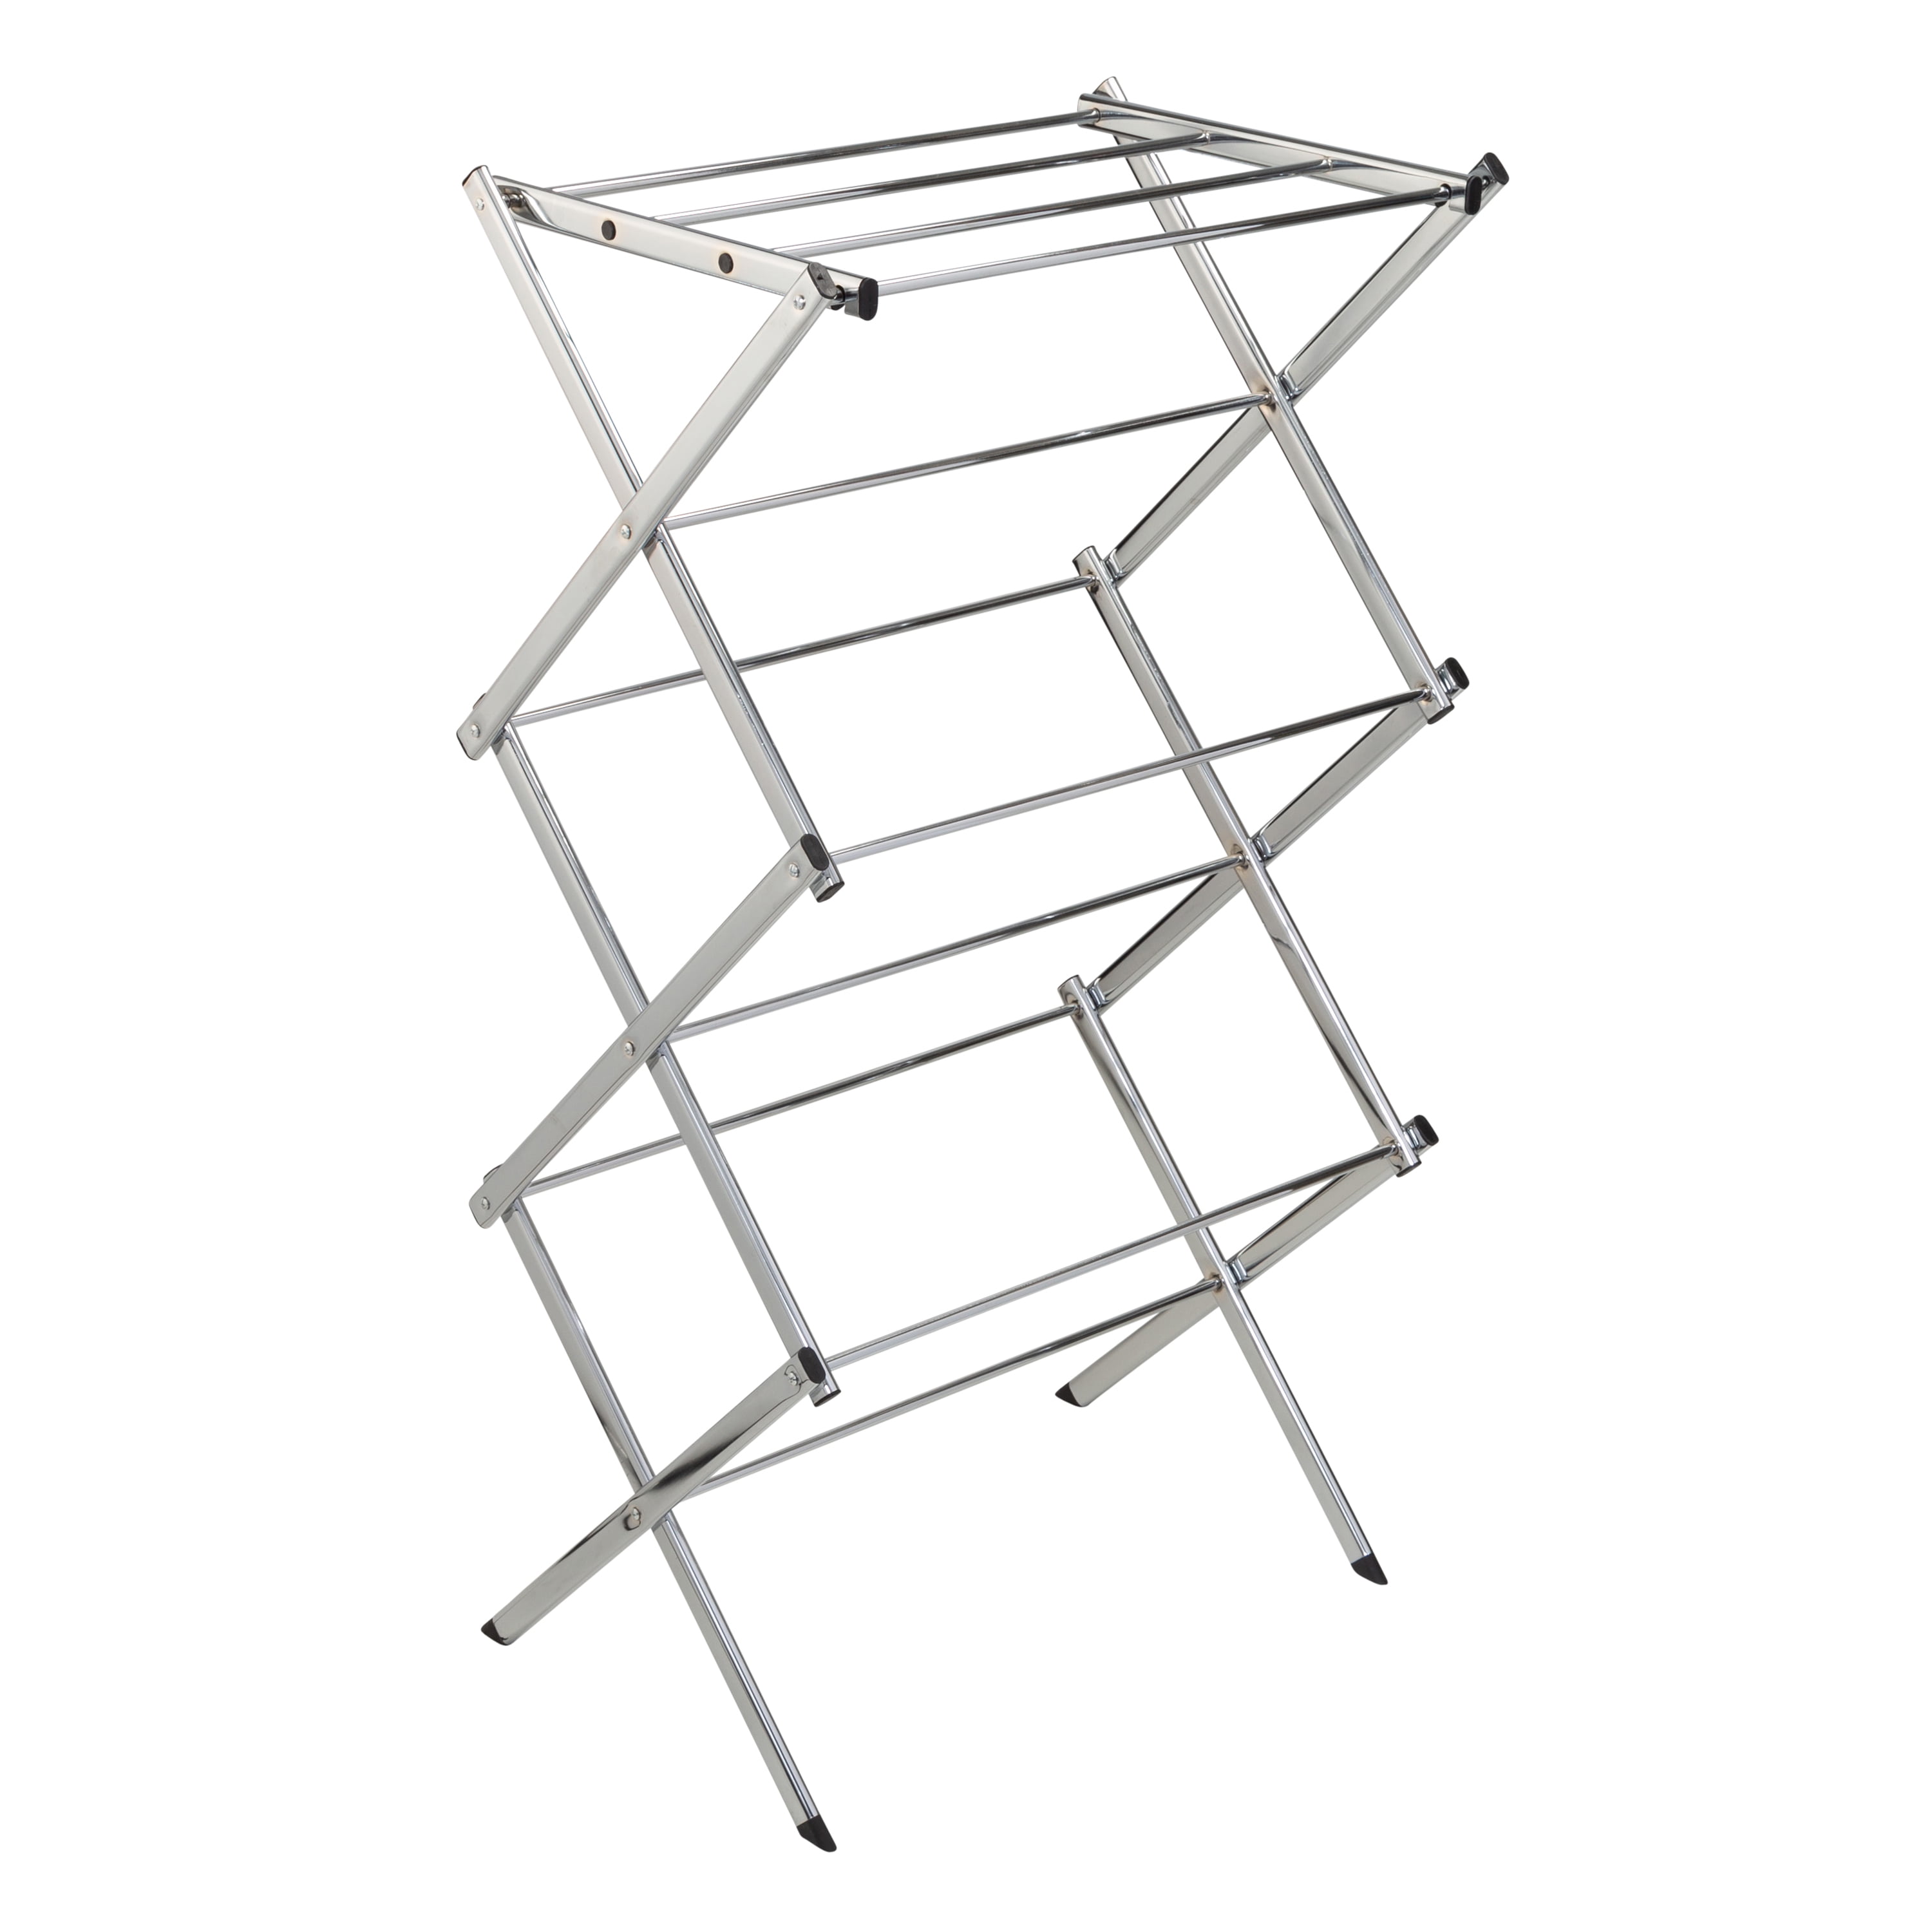 Stainless Steel Indoor Airer Chrome Metal Foldable Portable Clothes Drier Large 